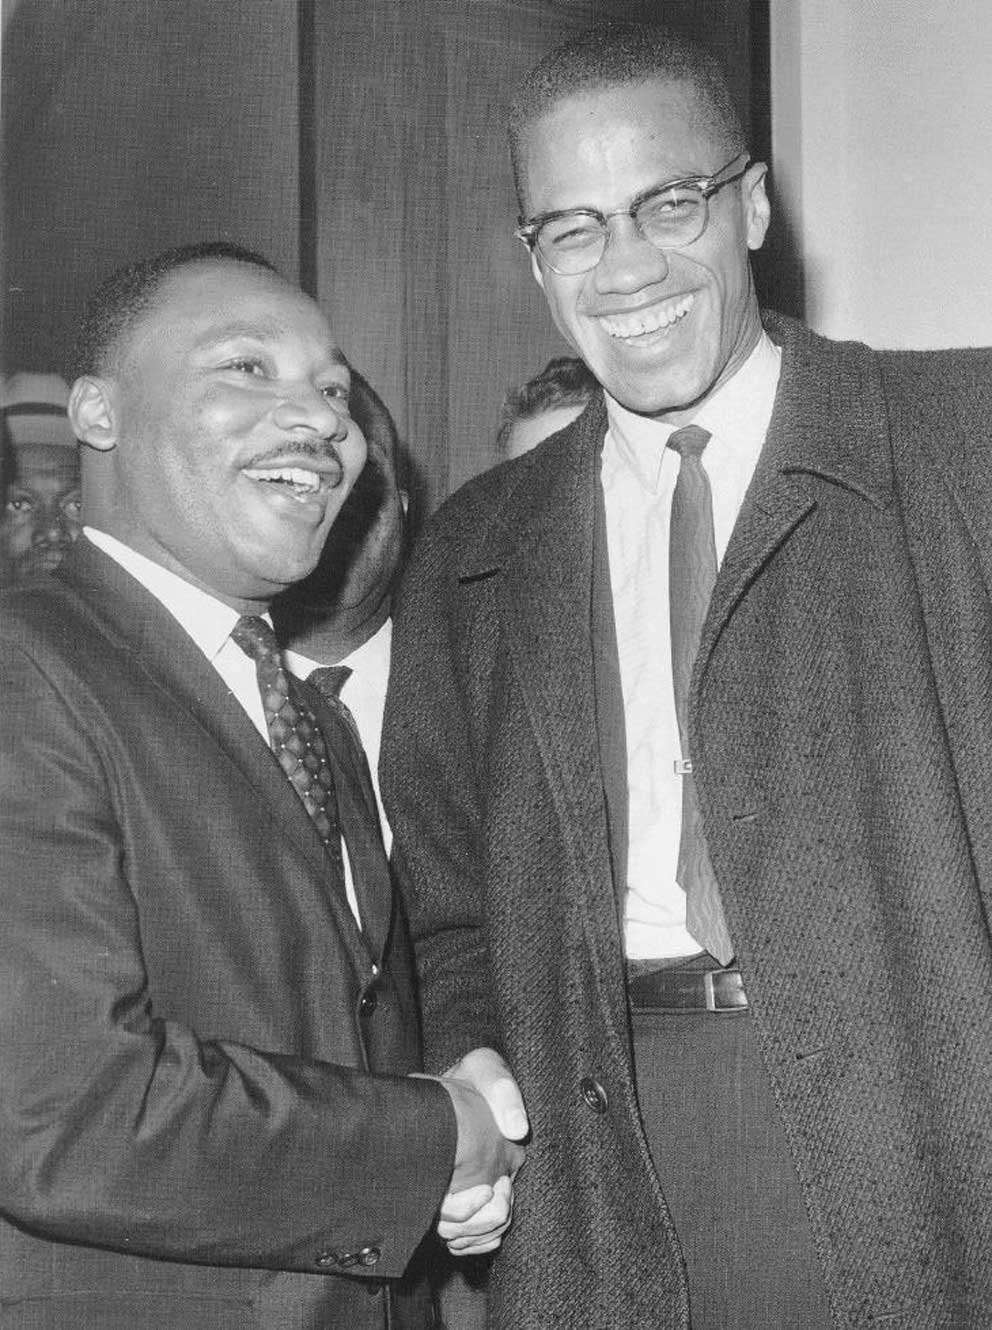 Ratio Juris: Malcolm X and Martin Luther King, Jr.: Violence & Nonviolence